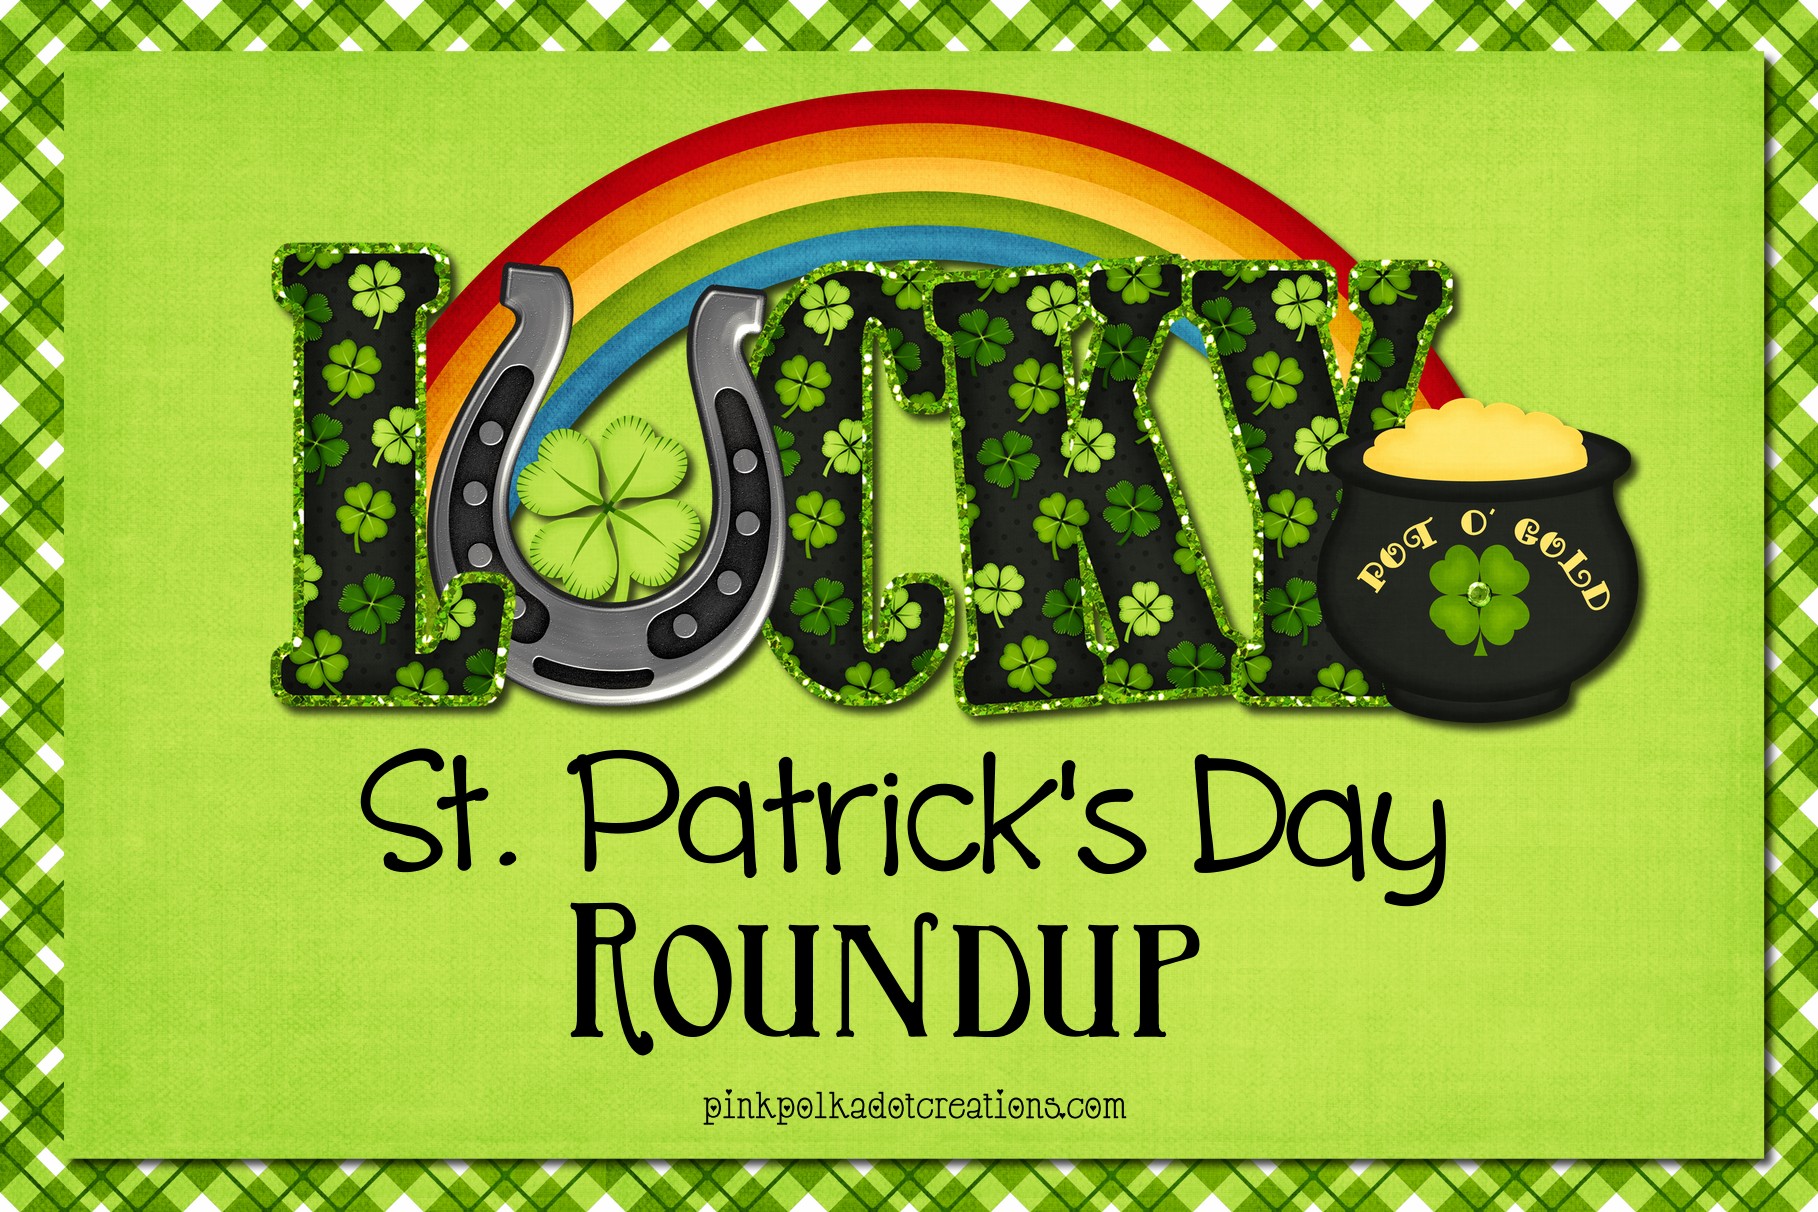 St.-Patrick's-Day-roundup-000-Page-1